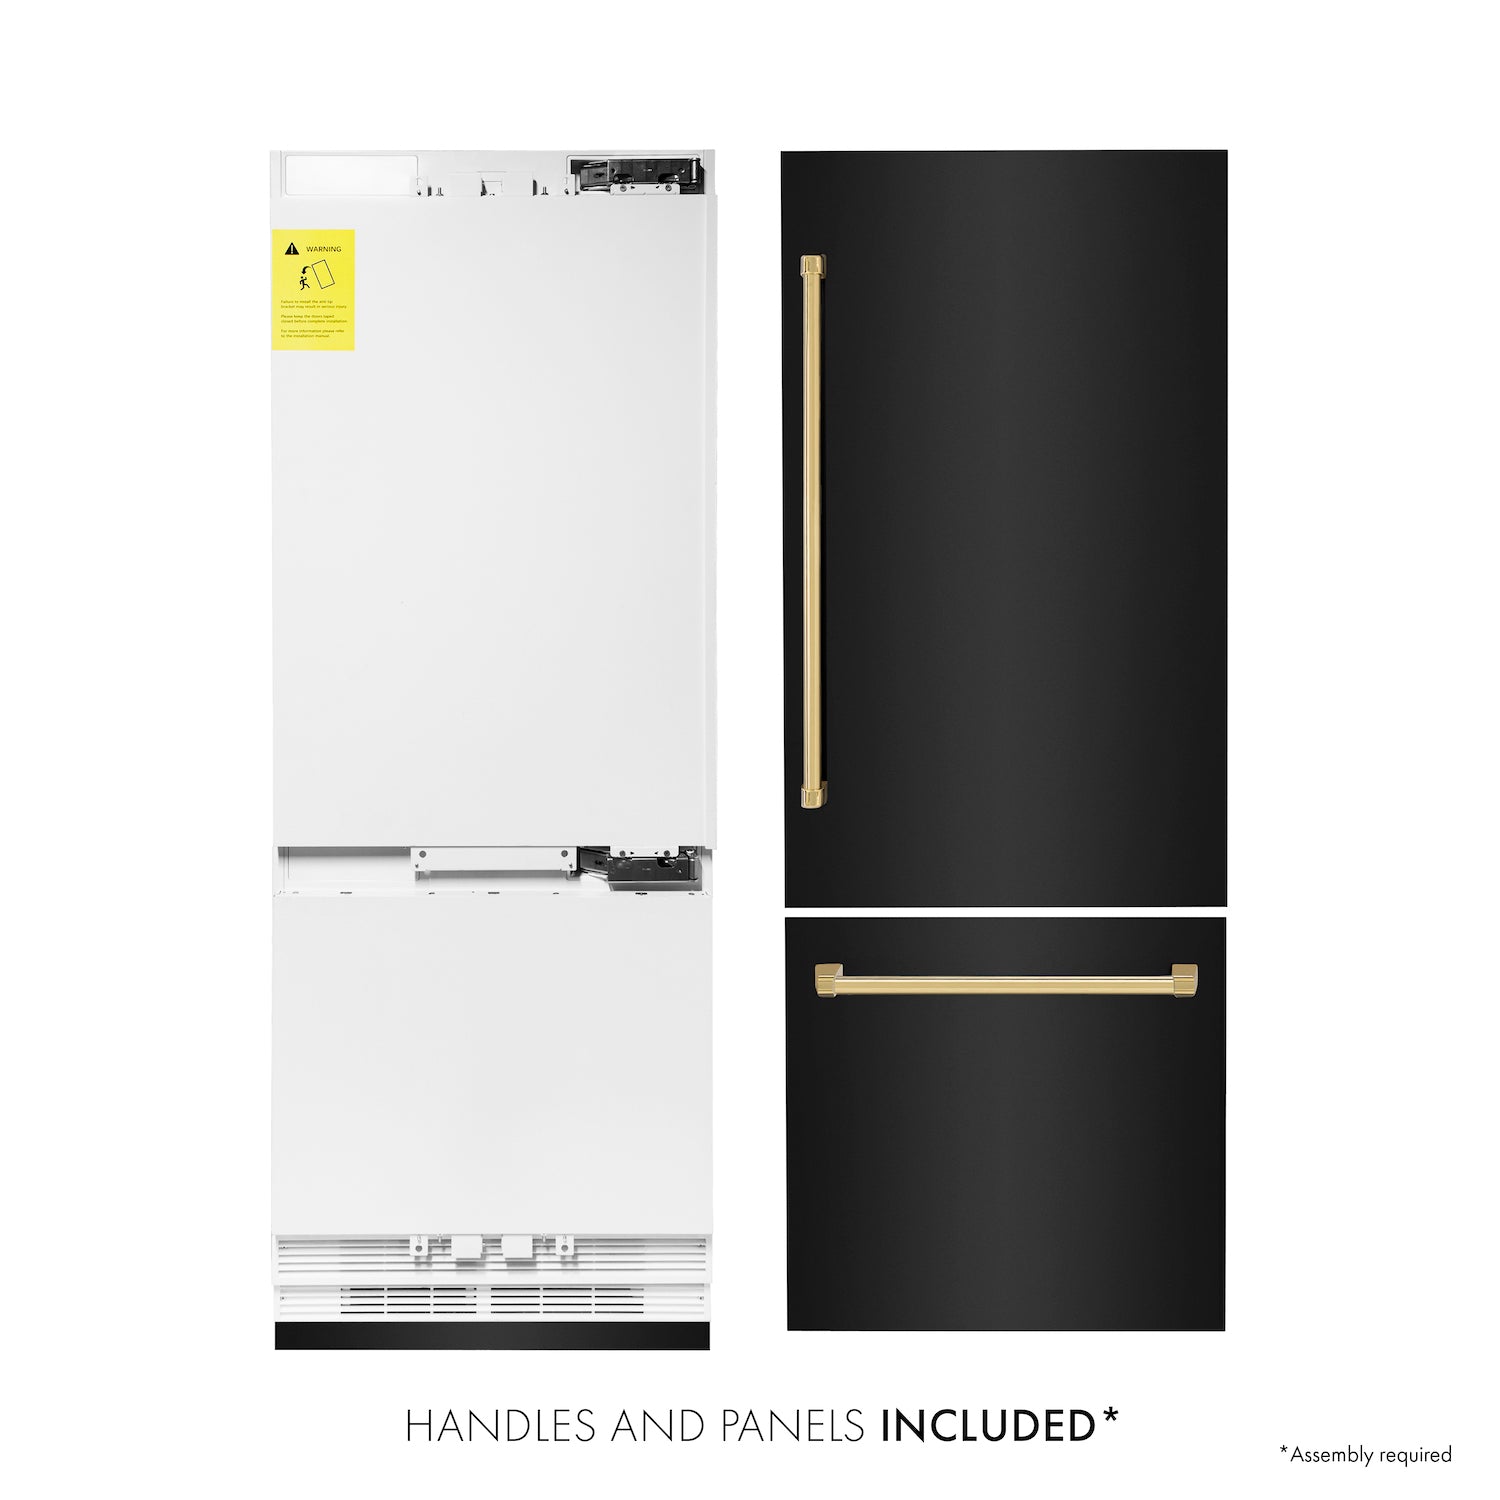 ZLINE Autograph Edition 30 in. 16.1 cu. ft. Built-in 2-Door Bottom Freezer Refrigerator with Internal Water and Ice Dispenser in Black Stainless Steel with Polished Gold Accents (RBIVZ-BS-30-G) front, refrigeration unit, panels, and handles separated .